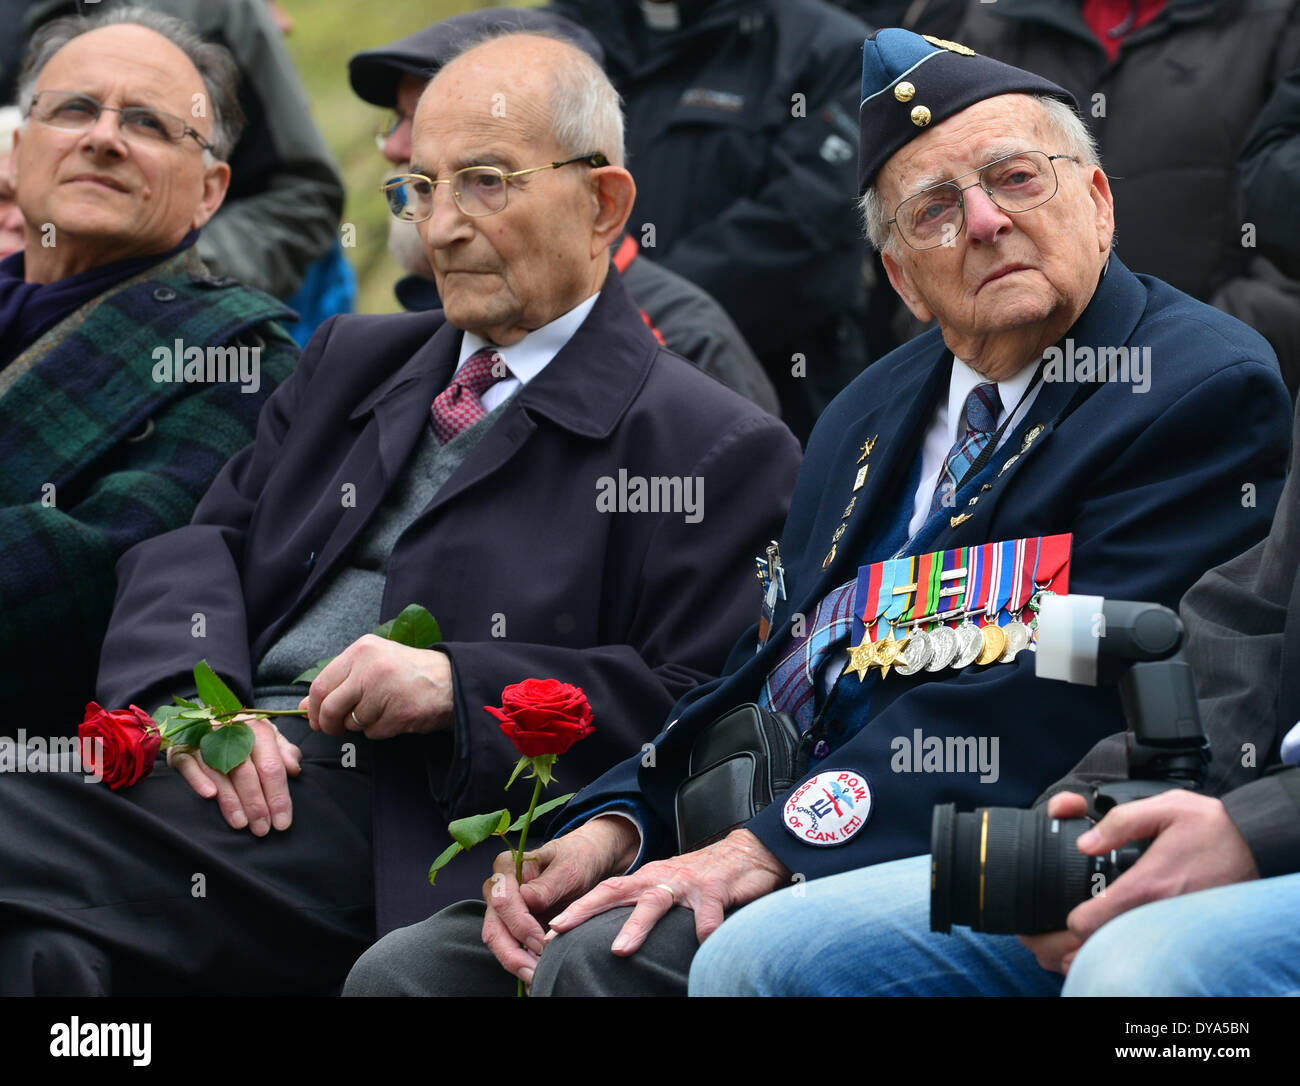 Nordhausen, Germany. 11th Apr, 2014. Bertrand Herz from France (L-R) and Ed Carter-Edwards from Canada sit in front of the crematorium during a commemoration event for the dead at concentration camp memorial site Mittelbau-Dora in Nordhausen, Germany, 11 April 2014. One the same day is the 69th anniversary of the liberation of the National Socialist camp. This year's commemoration event focuses on the genocide of the Hungarian Jews. Photo: Martin Schutt/dpa/Alamy Live News Stock Photo